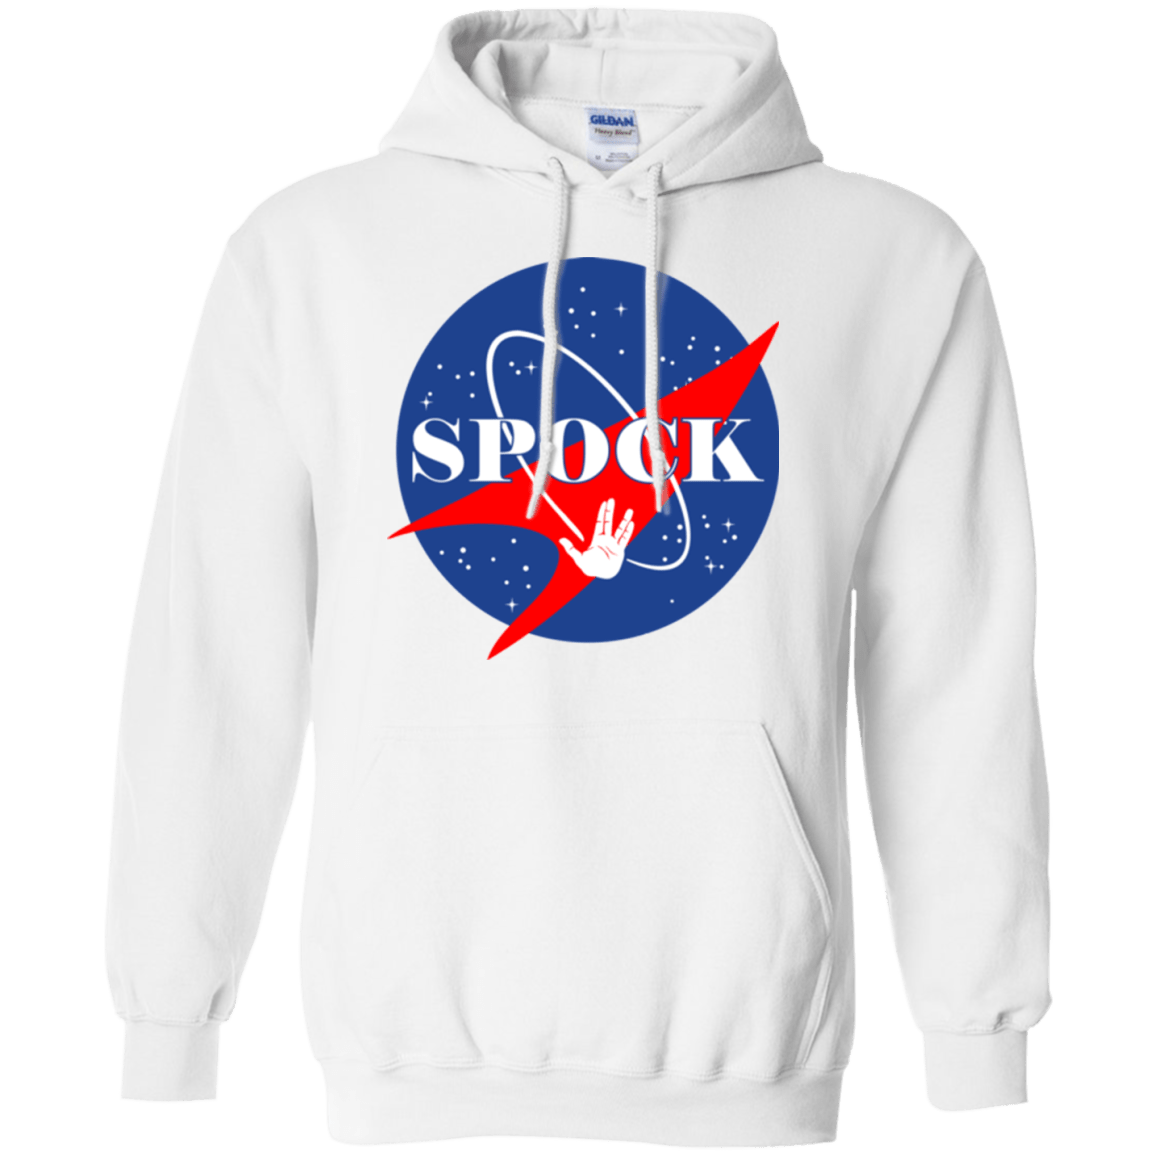 Sweatshirts White / Small Star captain Pullover Hoodie